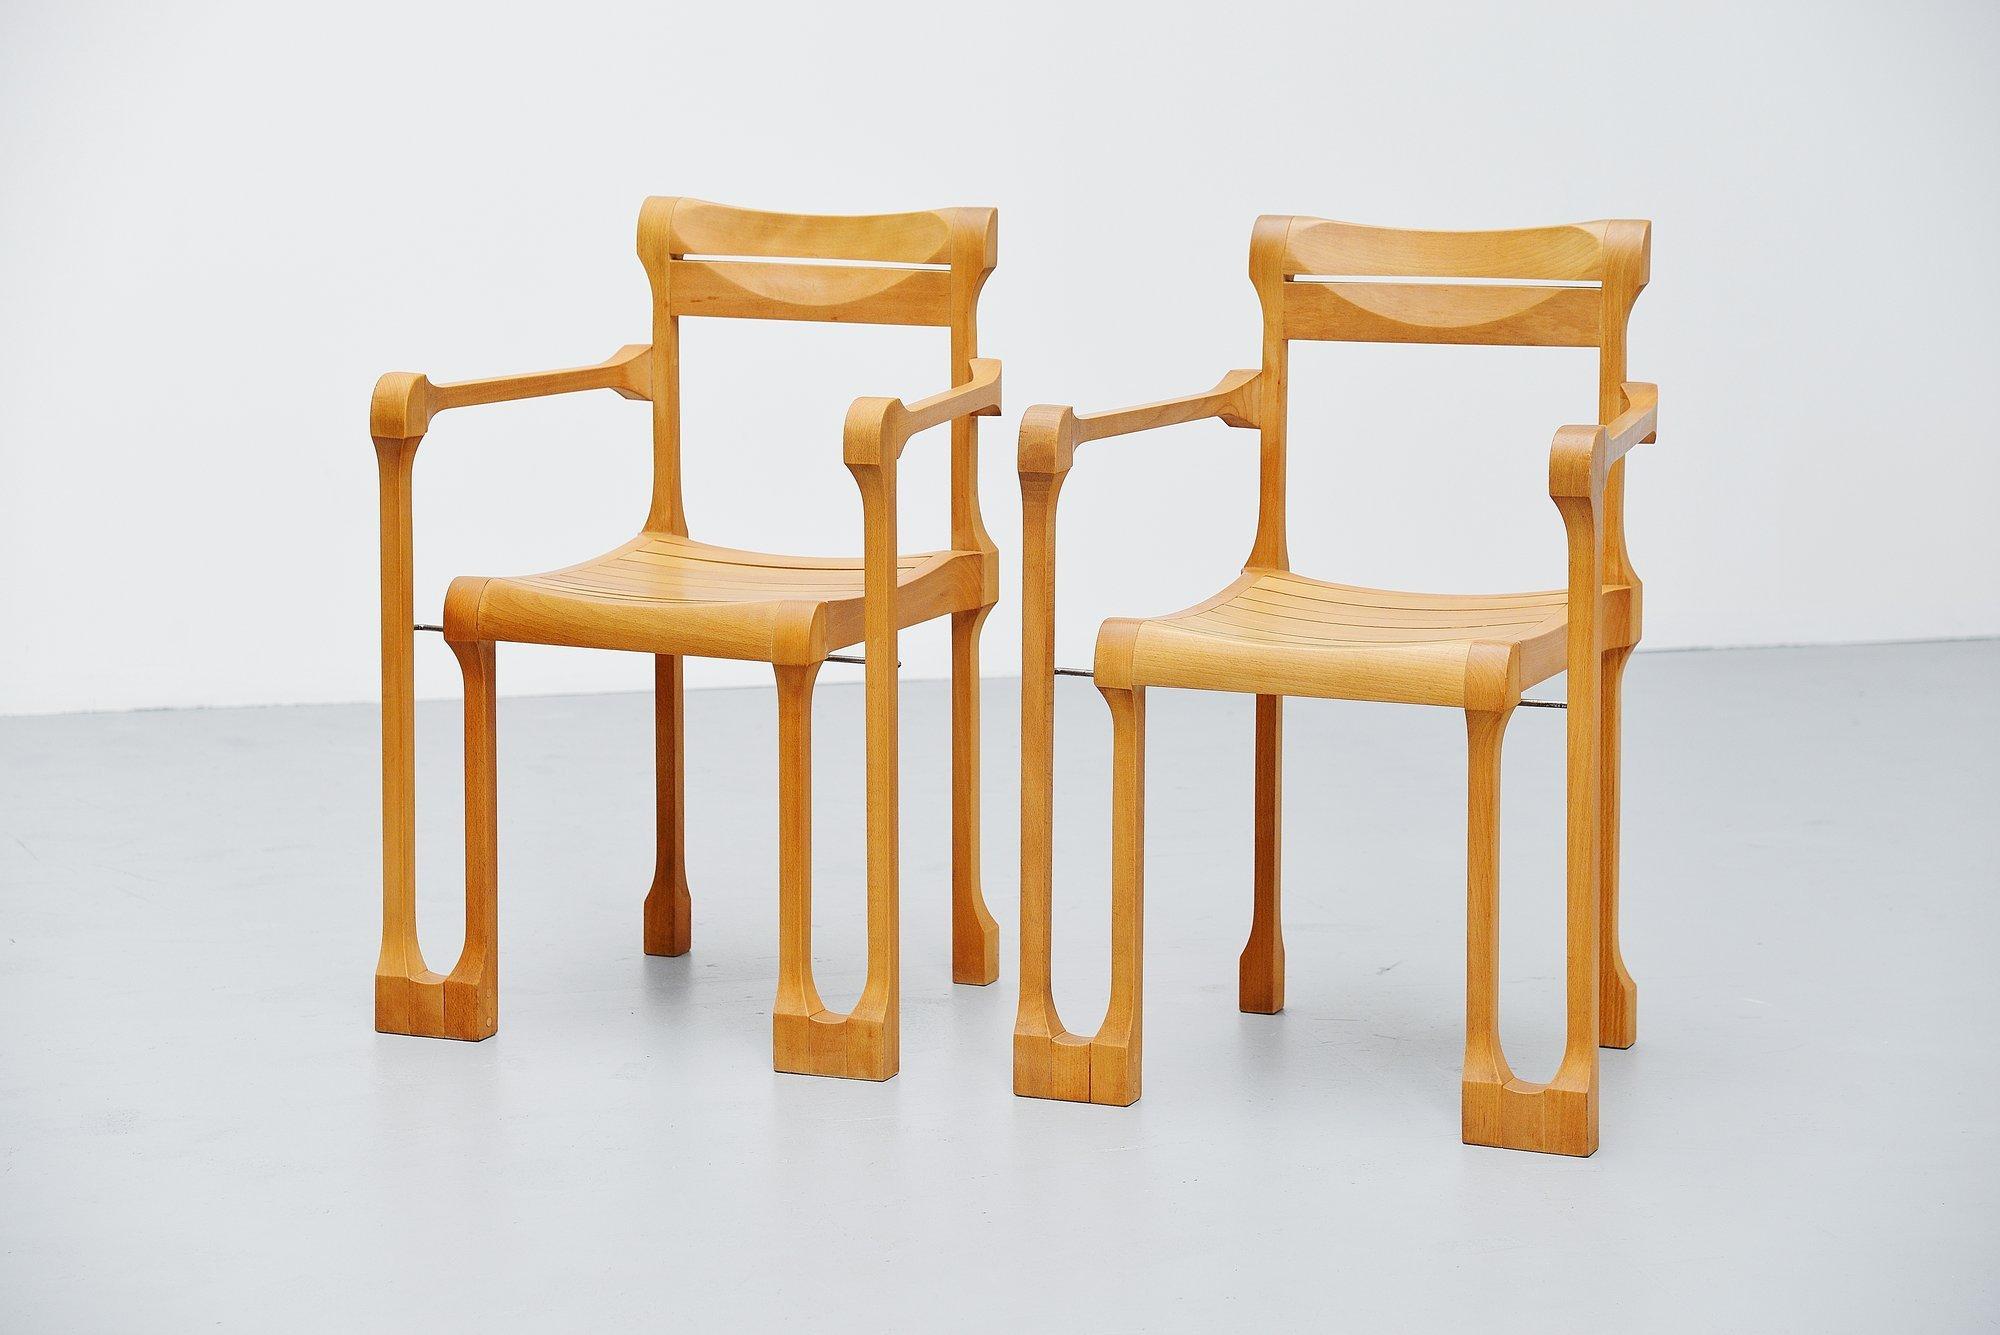 Very nice pair of armchairs designed and manufactured by Ruud Jan Kokke, Holland 1990. These chairs are from the ‘pootjes’ series and were hand crafted in Ruud Jan Kokke’s atelier and only made upon request. The chairs and stools from these series